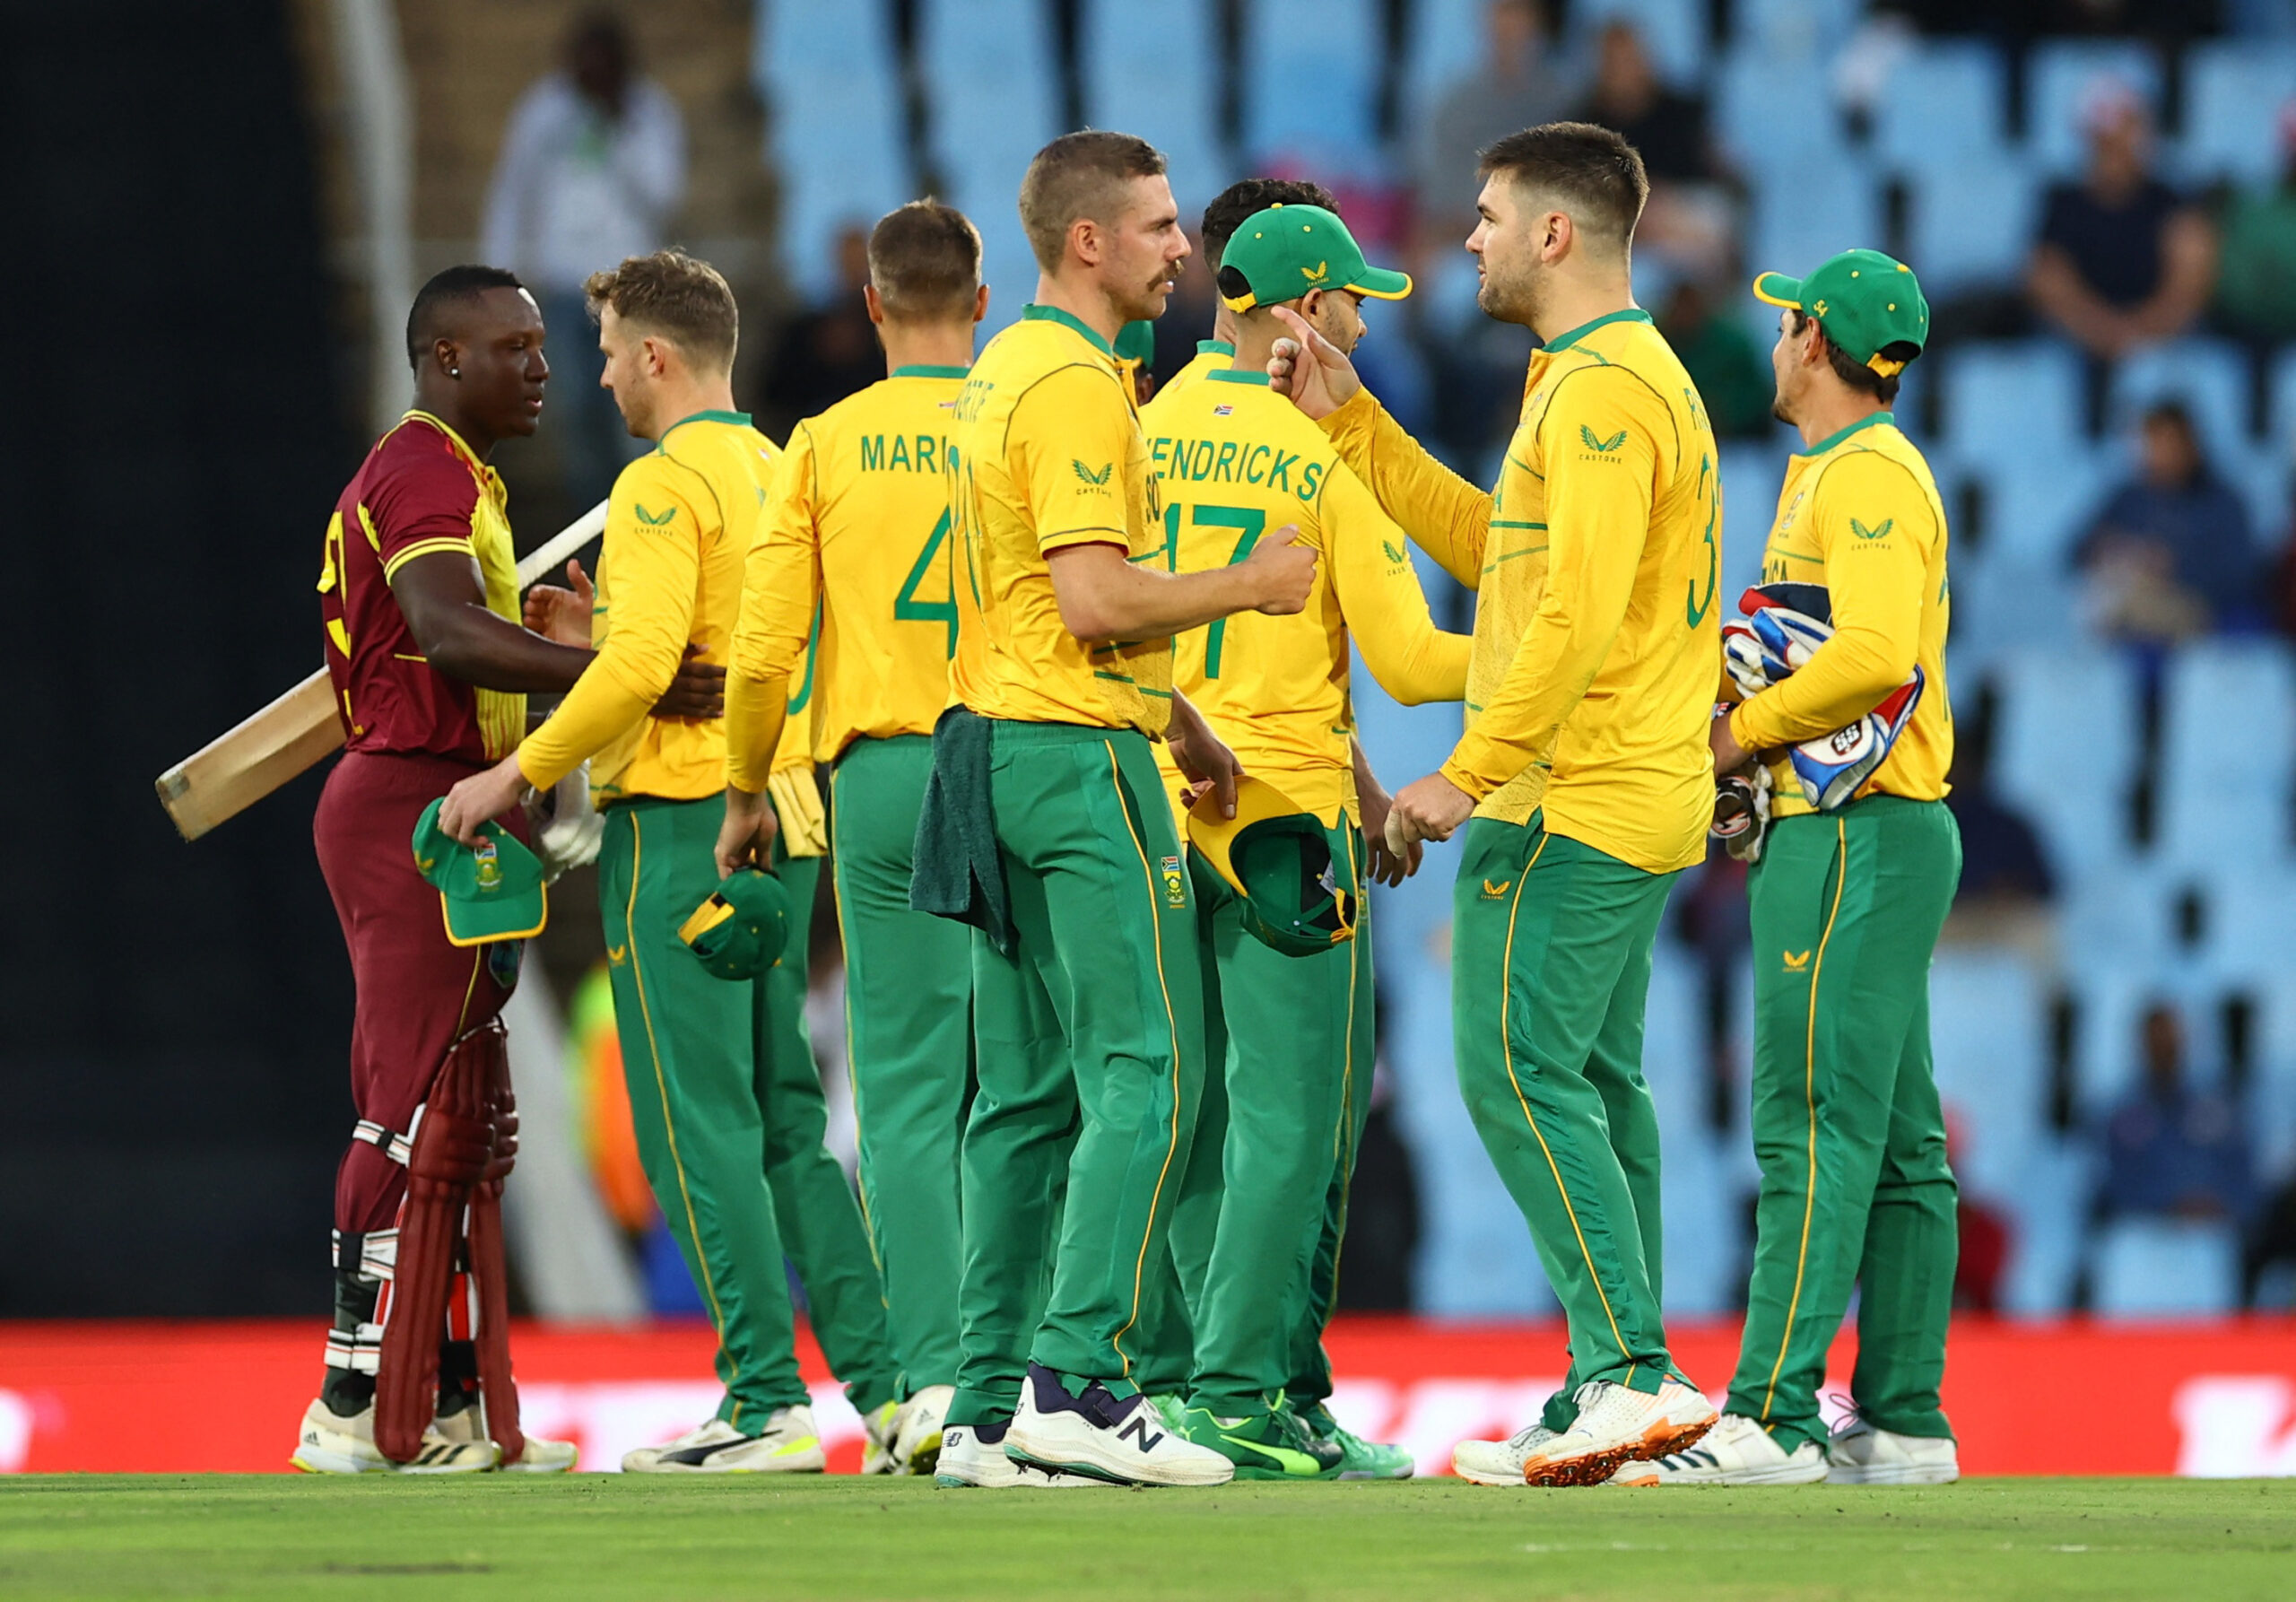 ICC World Cup 2023: South Africa Announce World Cup Squad, Temba Bavuma To Lead, Dewald Brevis, Tristan Stubbs Left Out